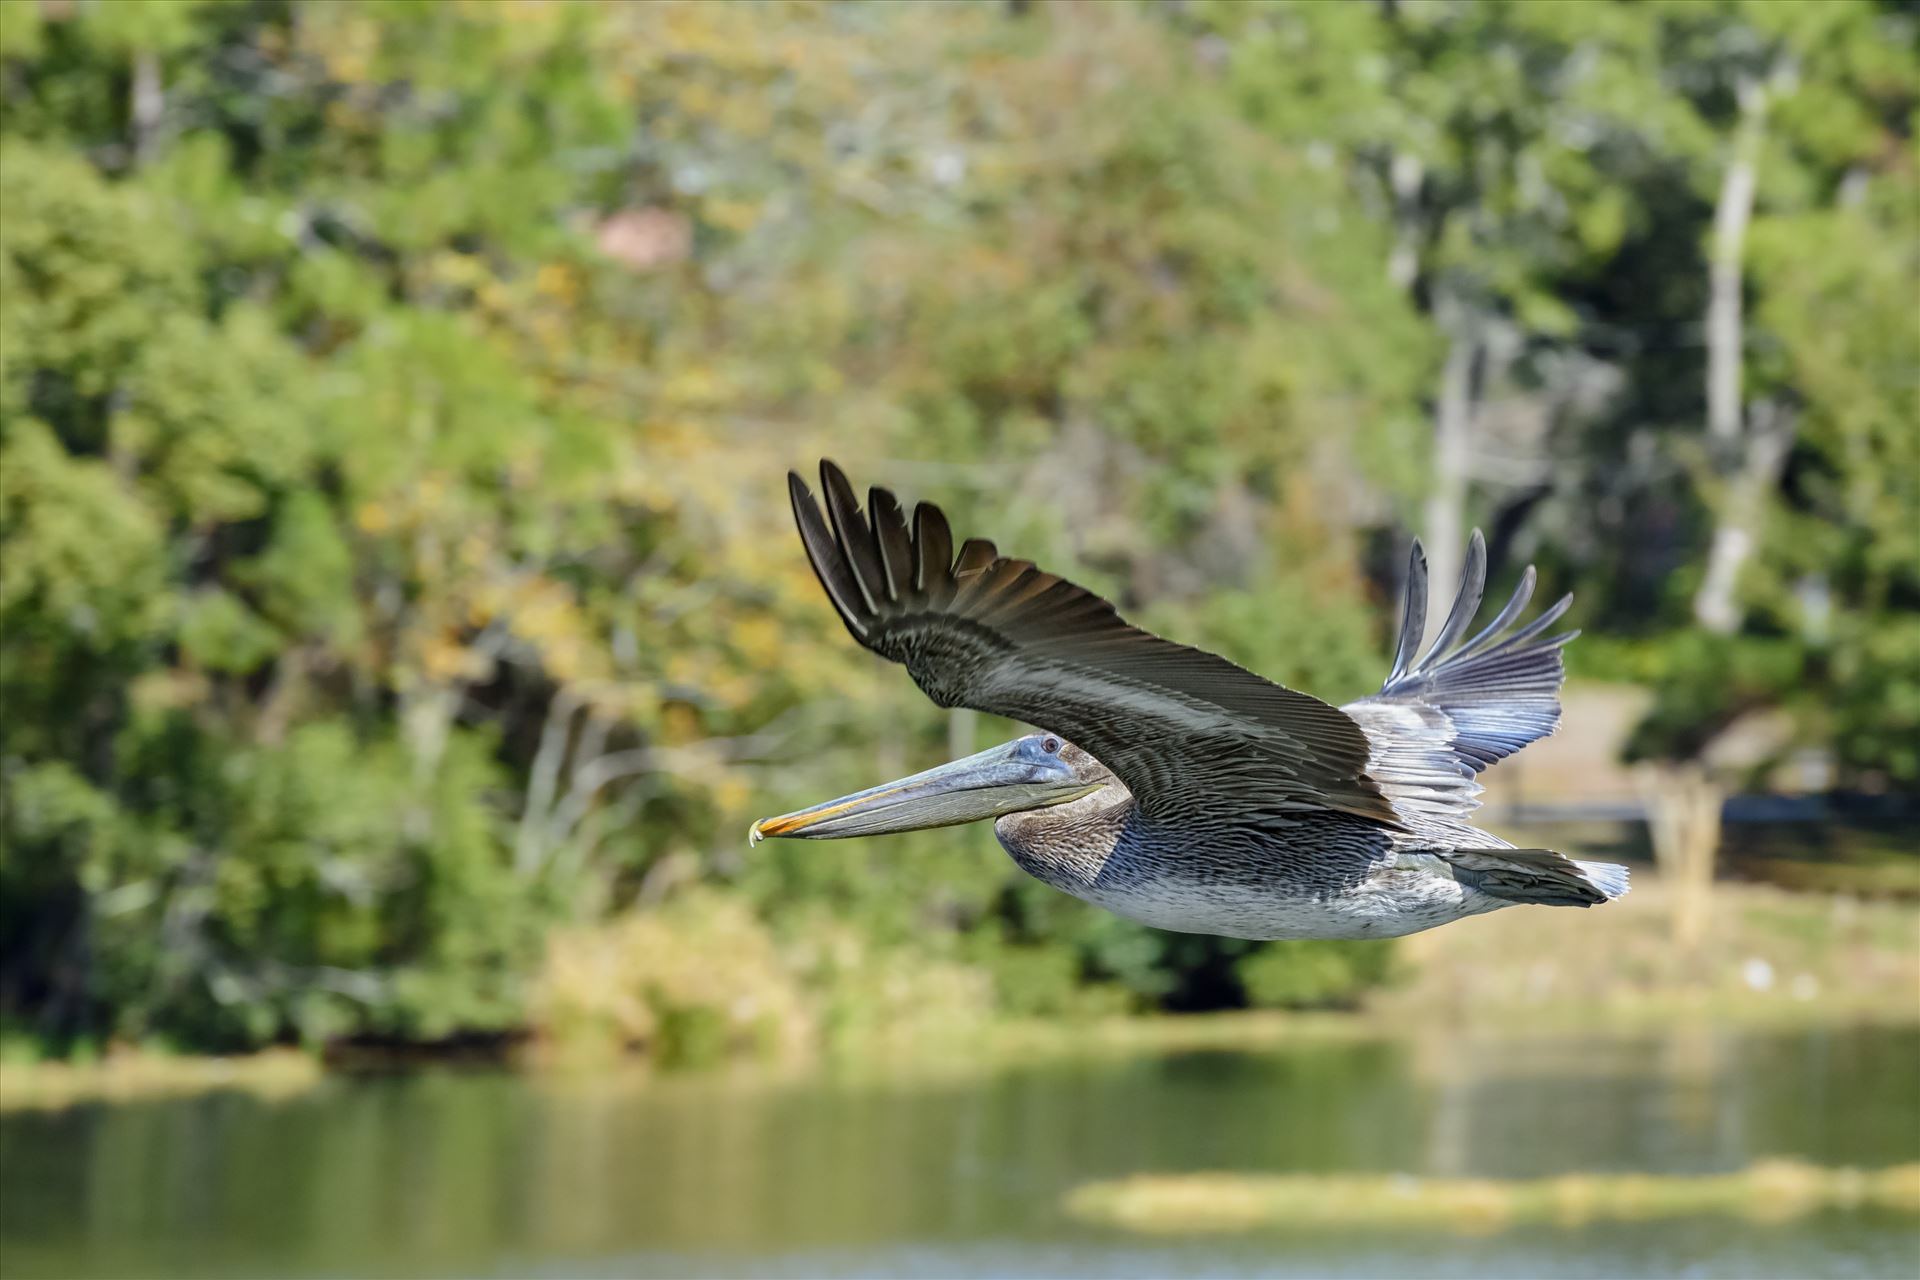 brown pelican in flight over lake caroline ss 8106768.jpg  by Terry Kelly Photography